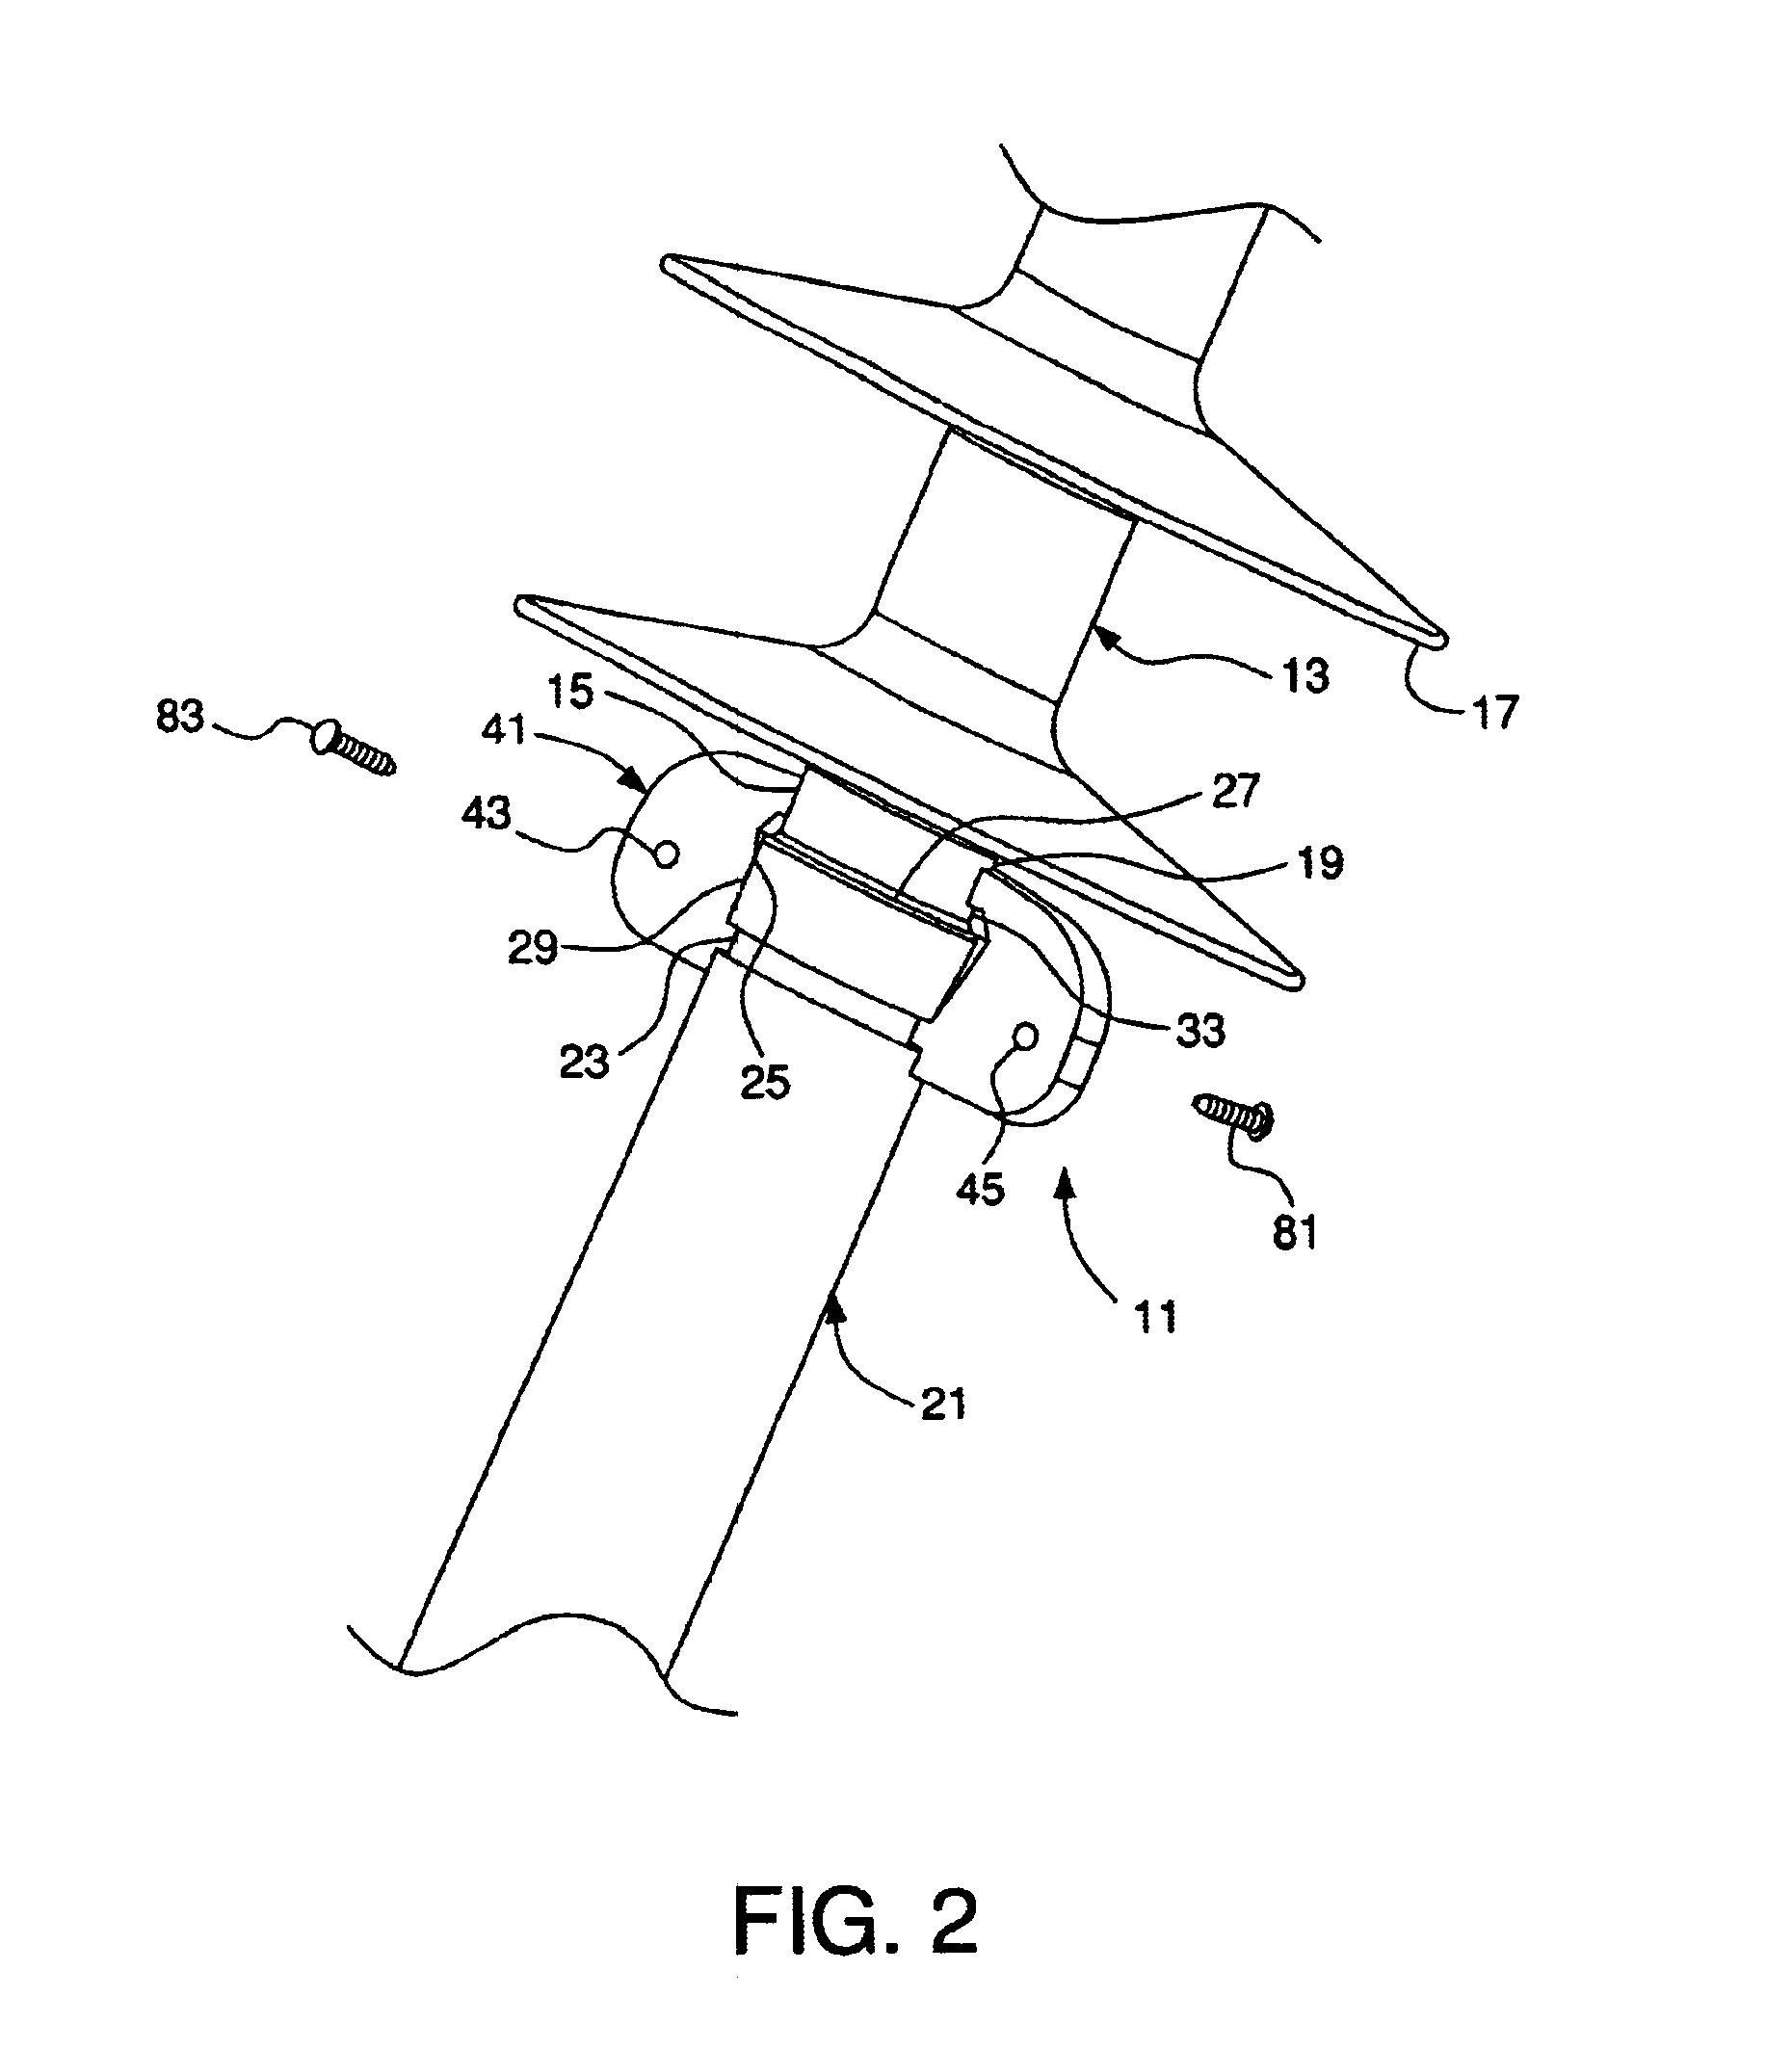 Insulator sealing and shielding collar assembly